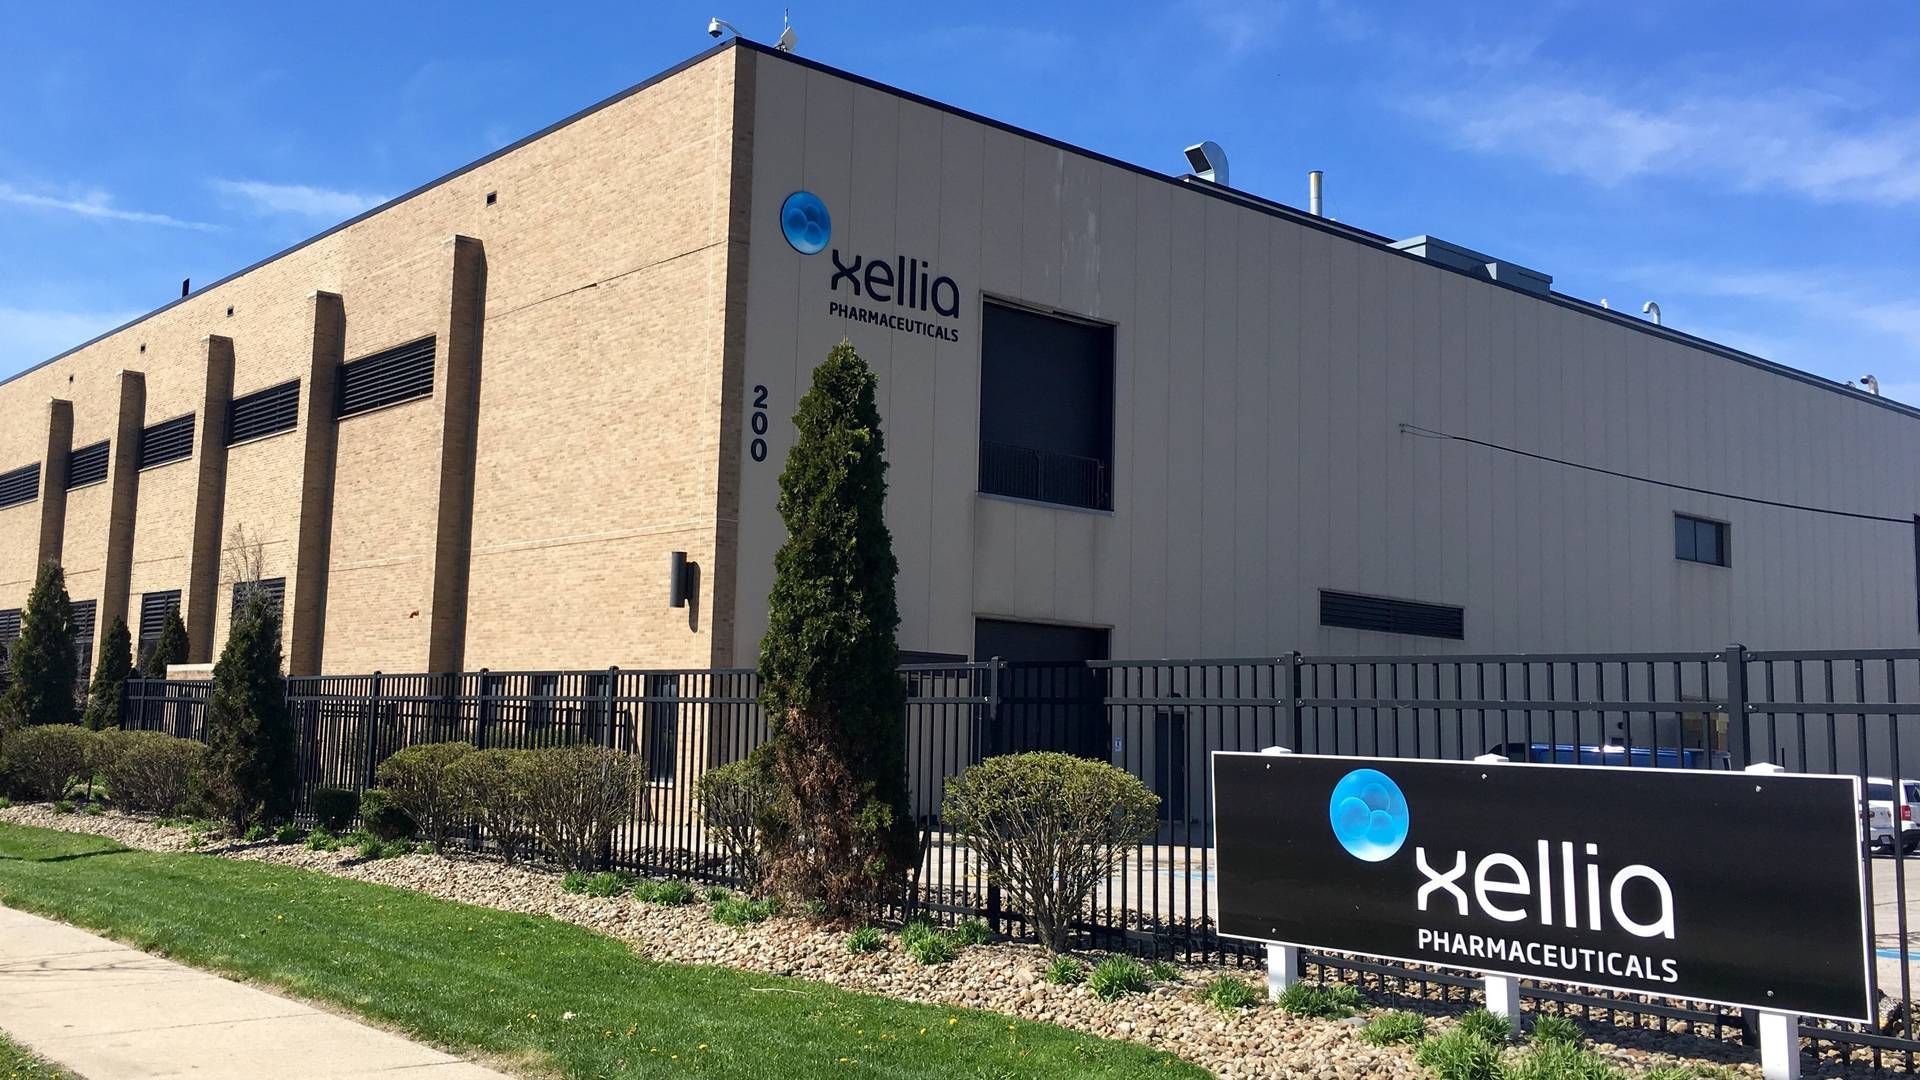 Xellia has been busy constructing a factory in Cleveland, the US, which is set to finish next year | Photo: Xellia Pharmaceuticals / Pr